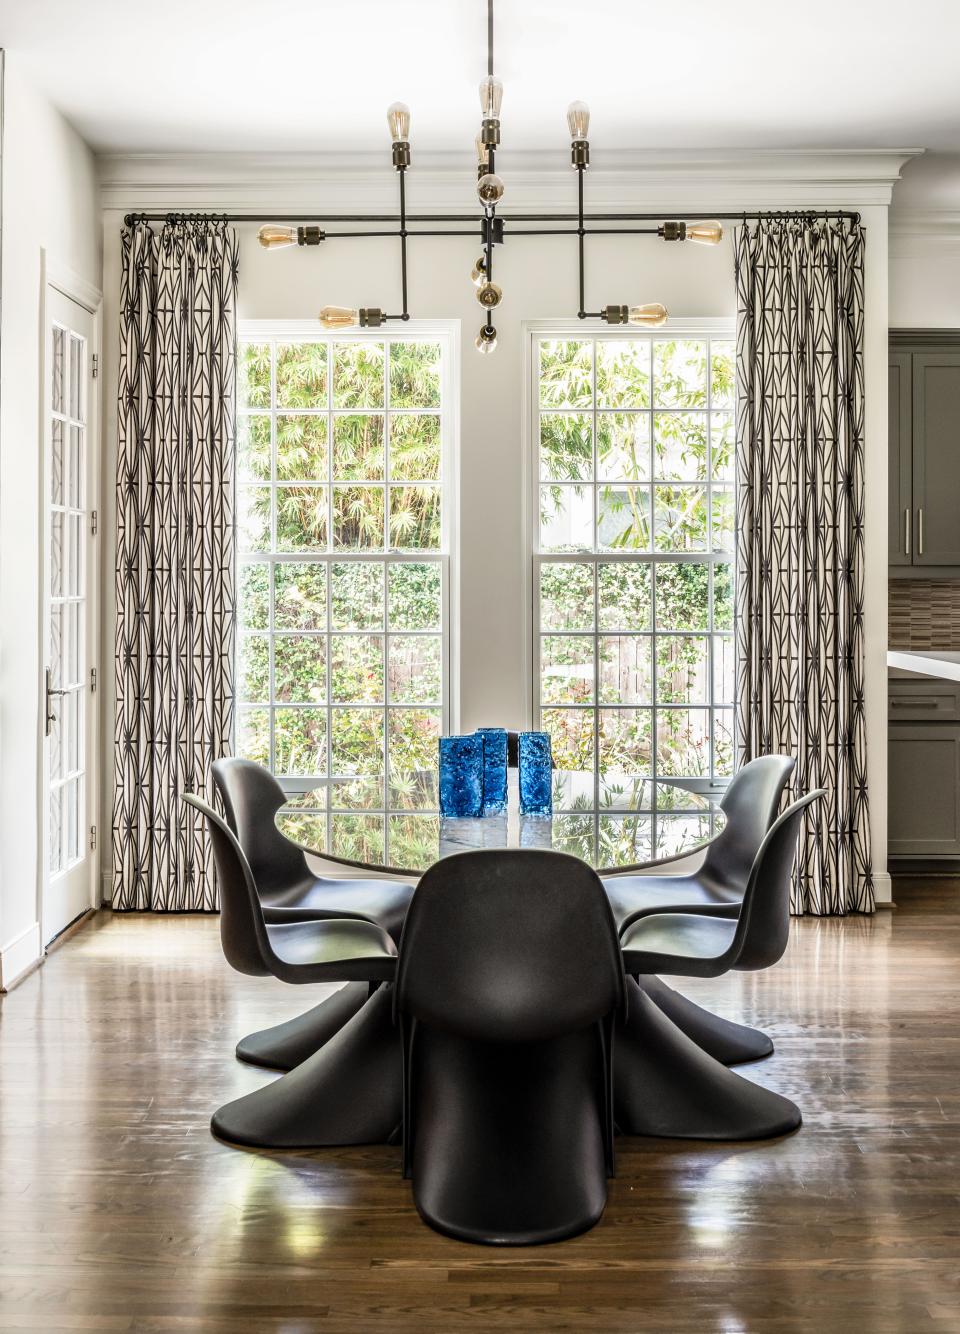 Set off the family room and kitchen, the breakfast area features a classic midcentury table by Room & Board, era-appropriate molded plastic chairs by Design Within Reach, and lighting from Wayfair. The curtains pop in every room; here they are made with a Kelly Wearstler fabric.